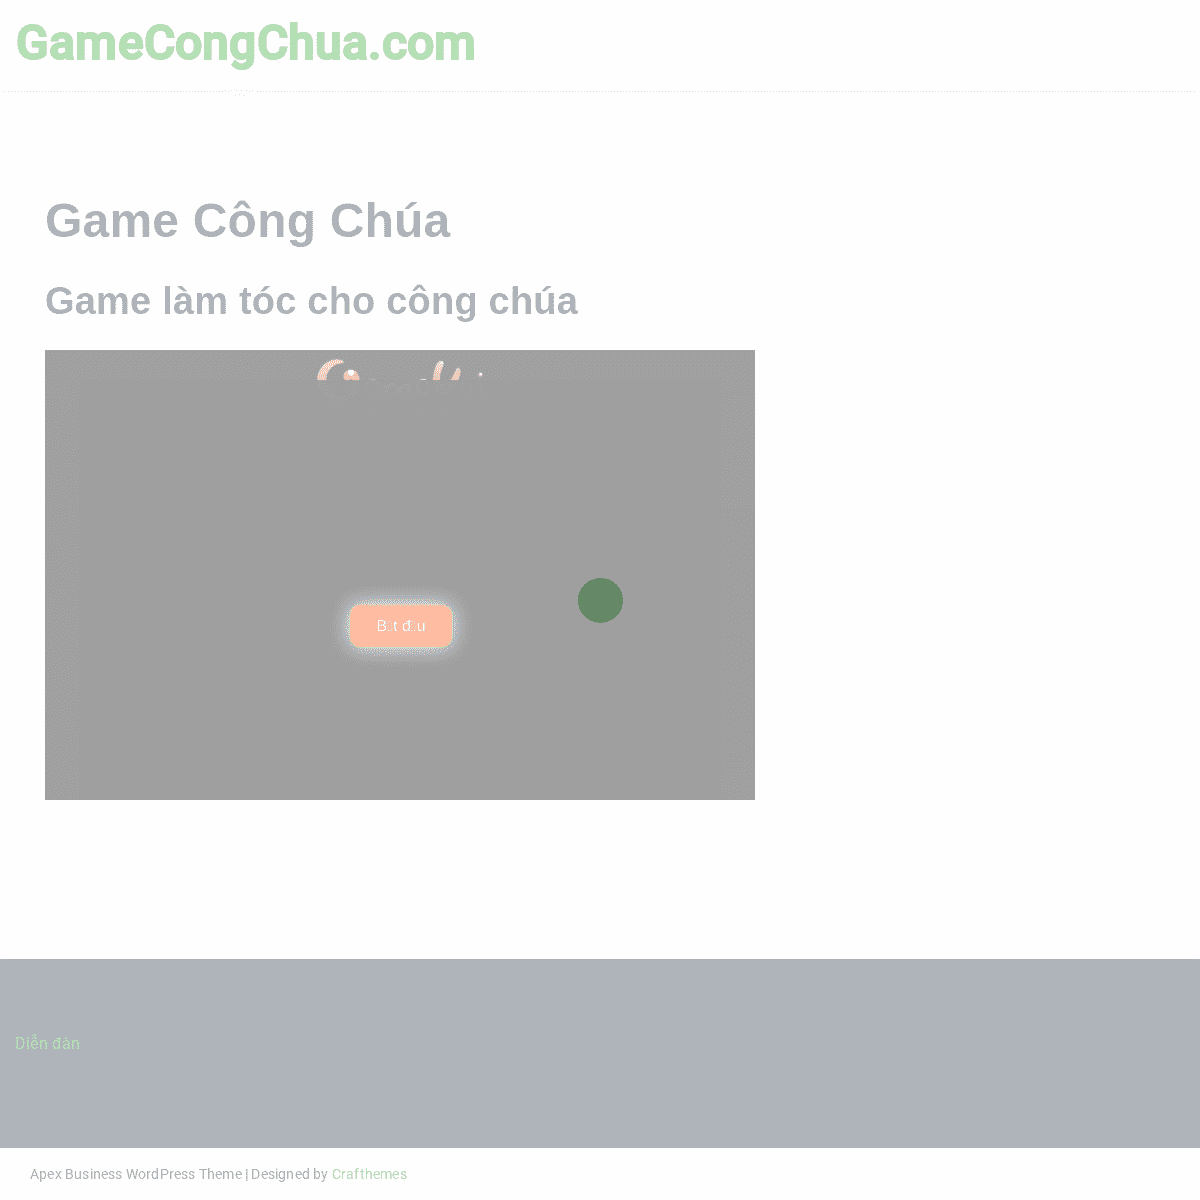 A complete backup of https://gamecongchua.com